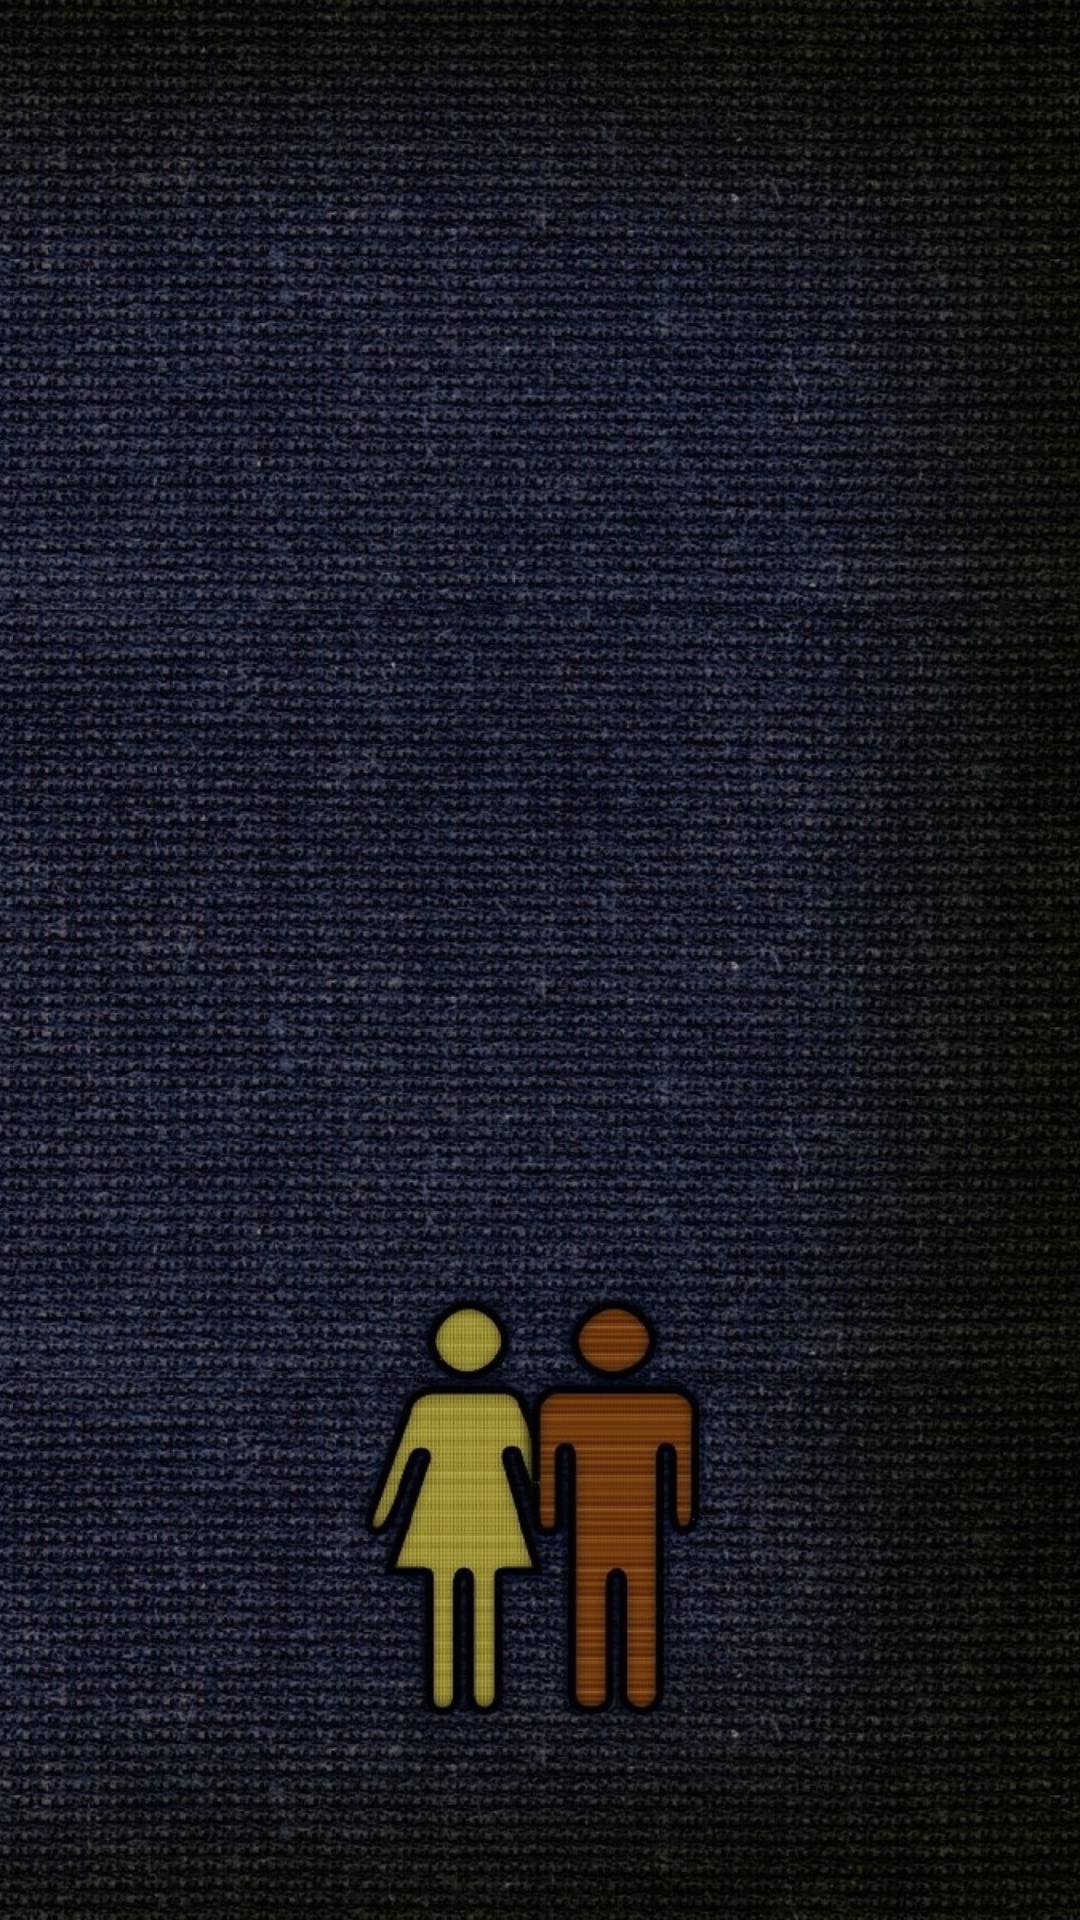 Him And Her wallpaper 1080x1920